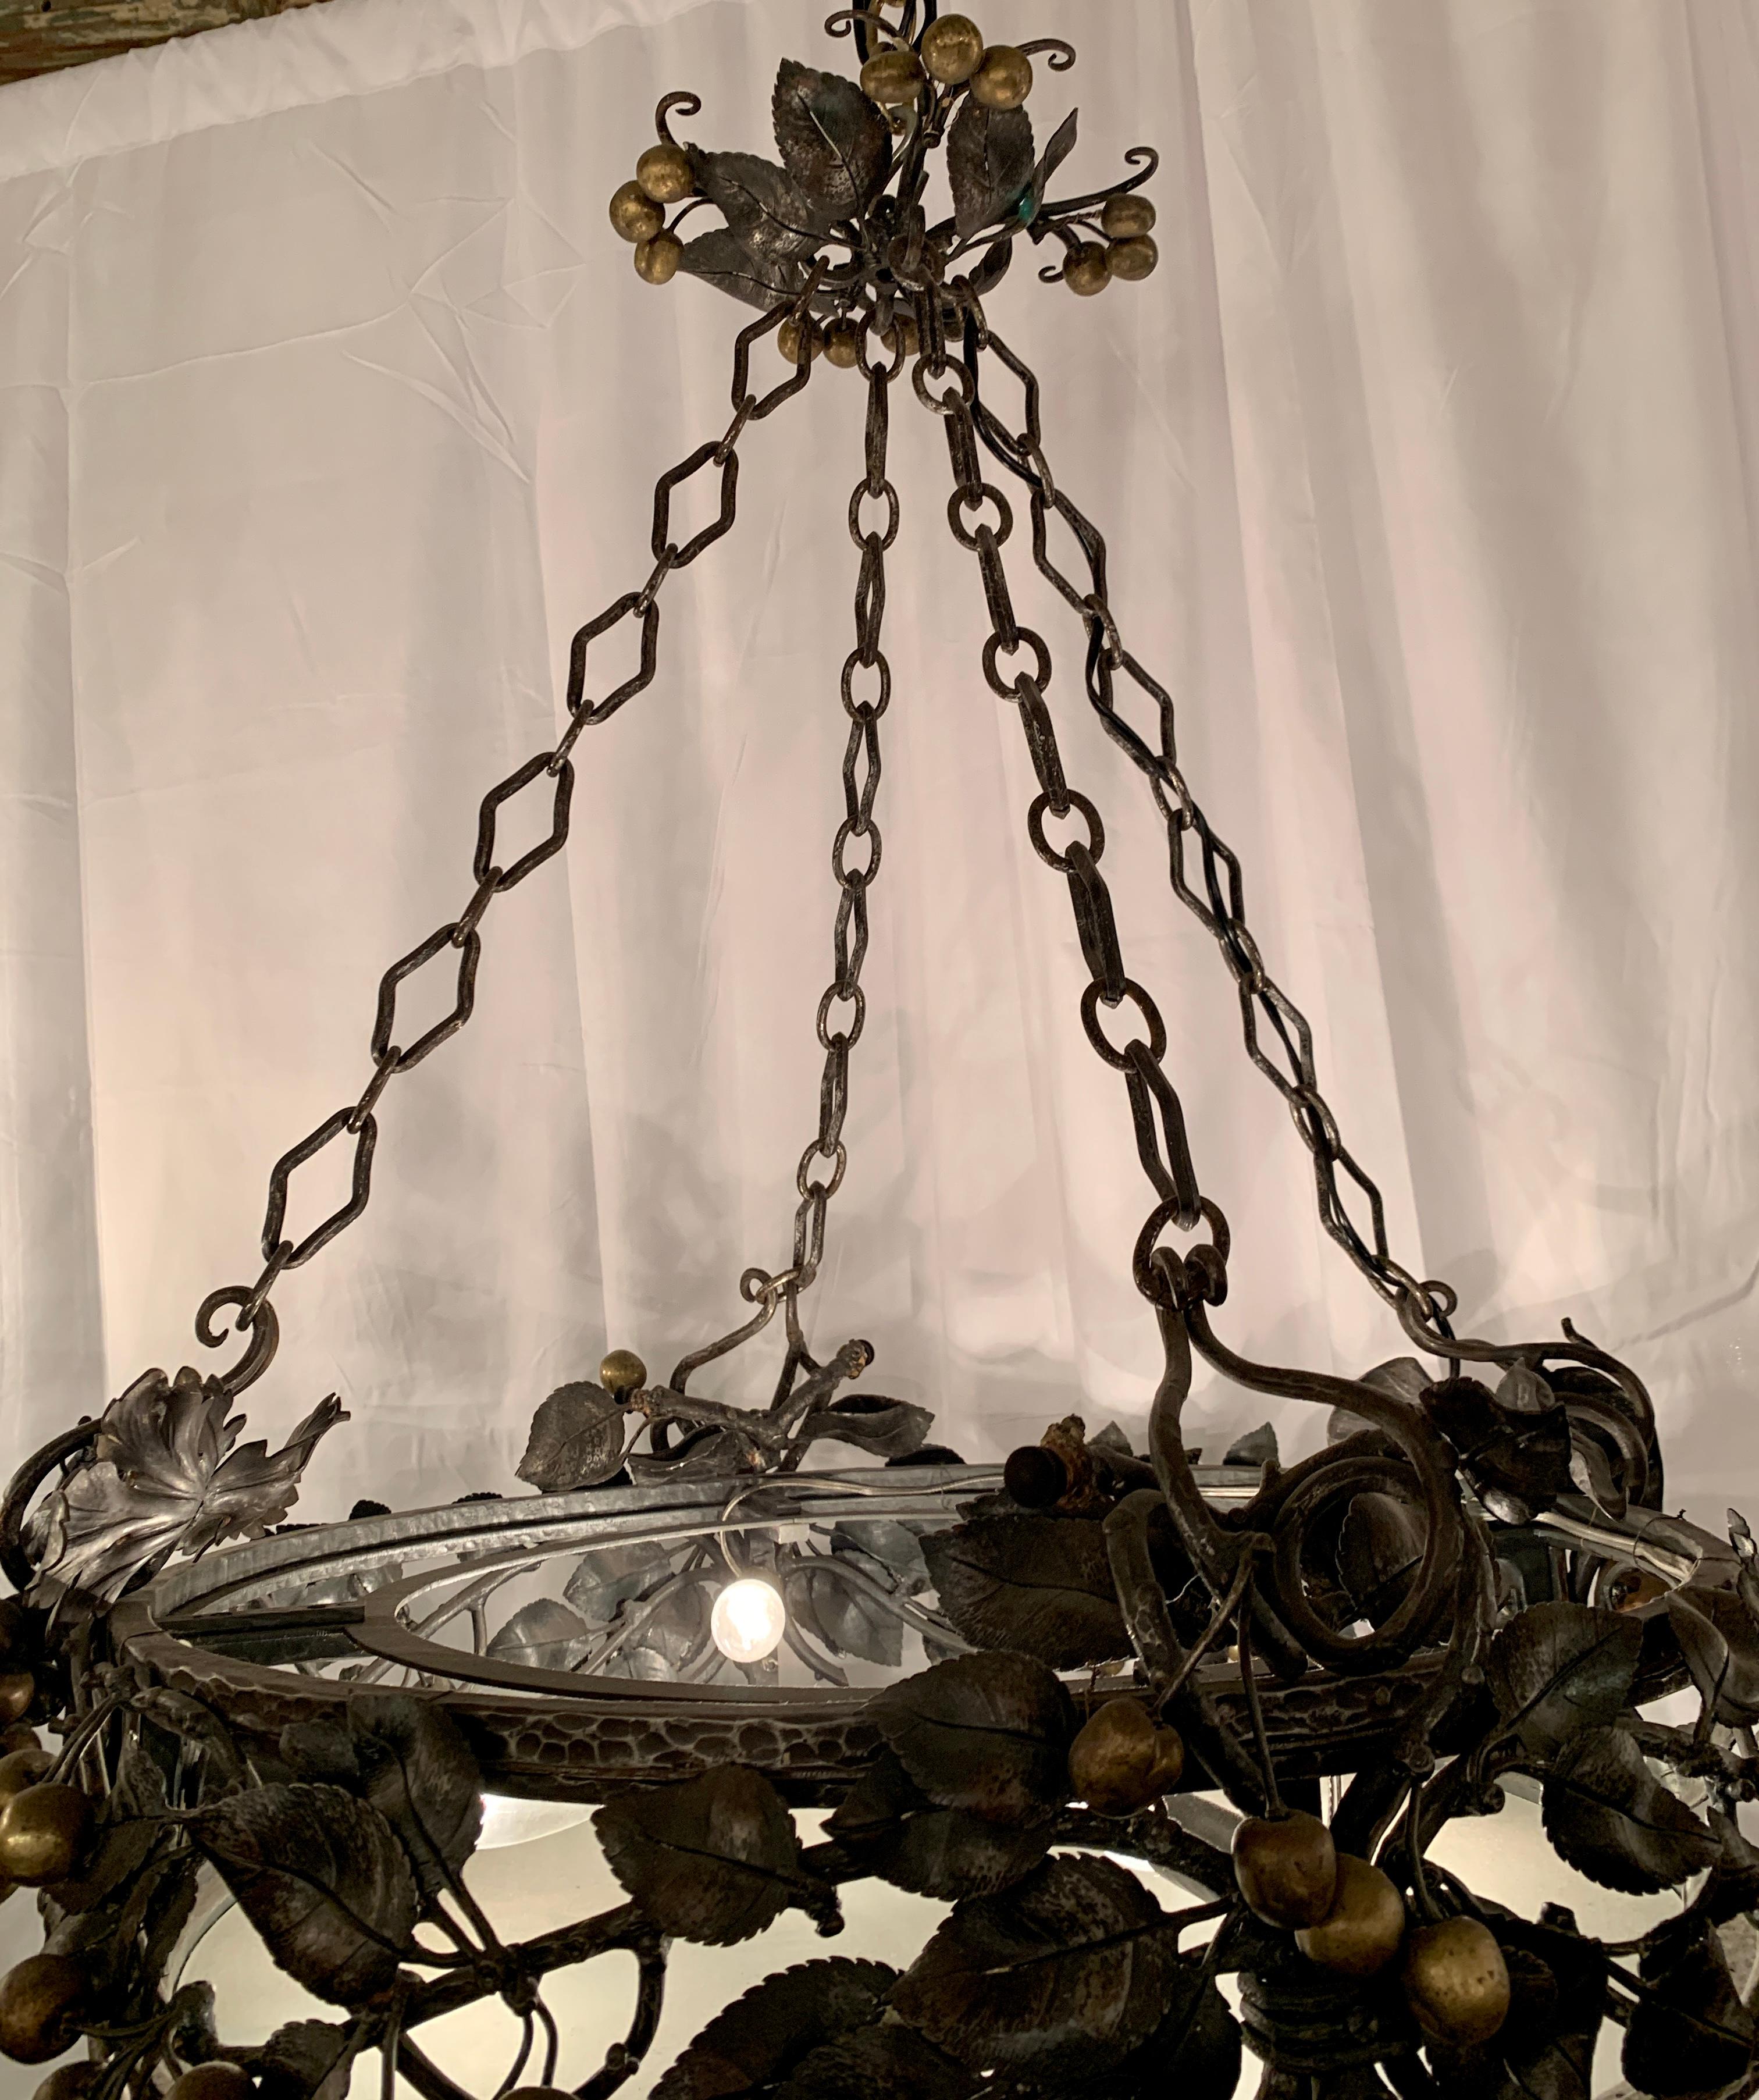 Antique French wrought iron & glass chandelier, grape bunches & pears motif, Circa 1890.